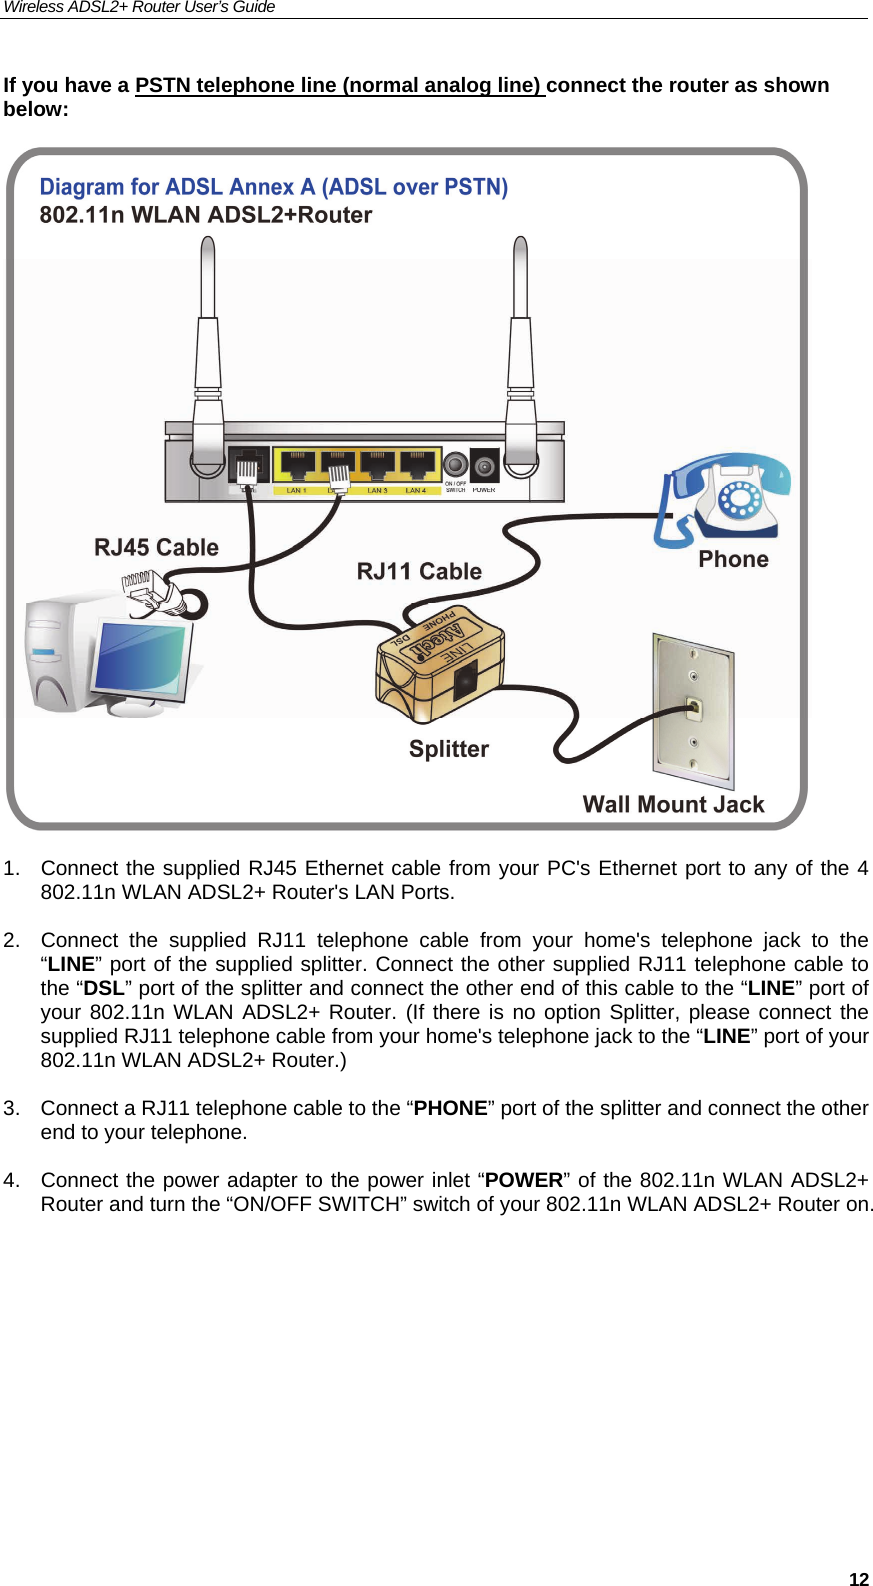 Wireless ADSL2+ Router User’s Guide     12If you have a PSTN telephone line (normal analog line) connect the router as shown below:     1.  Connect the supplied RJ45 Ethernet cable from your PC&apos;s Ethernet port to any of the 4 802.11n WLAN ADSL2+ Router&apos;s LAN Ports.  2.  Connect the supplied RJ11 telephone cable from your home&apos;s telephone jack to the “LINE” port of the supplied splitter. Connect the other supplied RJ11 telephone cable to the “DSL” port of the splitter and connect the other end of this cable to the “LINE” port of your 802.11n WLAN ADSL2+ Router. (If there is no option Splitter, please connect the supplied RJ11 telephone cable from your home&apos;s telephone jack to the “LINE” port of your 802.11n WLAN ADSL2+ Router.)  3.  Connect a RJ11 telephone cable to the “PHONE” port of the splitter and connect the other end to your telephone.  4.  Connect the power adapter to the power inlet “POWER” of the 802.11n WLAN ADSL2+ Router and turn the “ON/OFF SWITCH” switch of your 802.11n WLAN ADSL2+ Router on.      